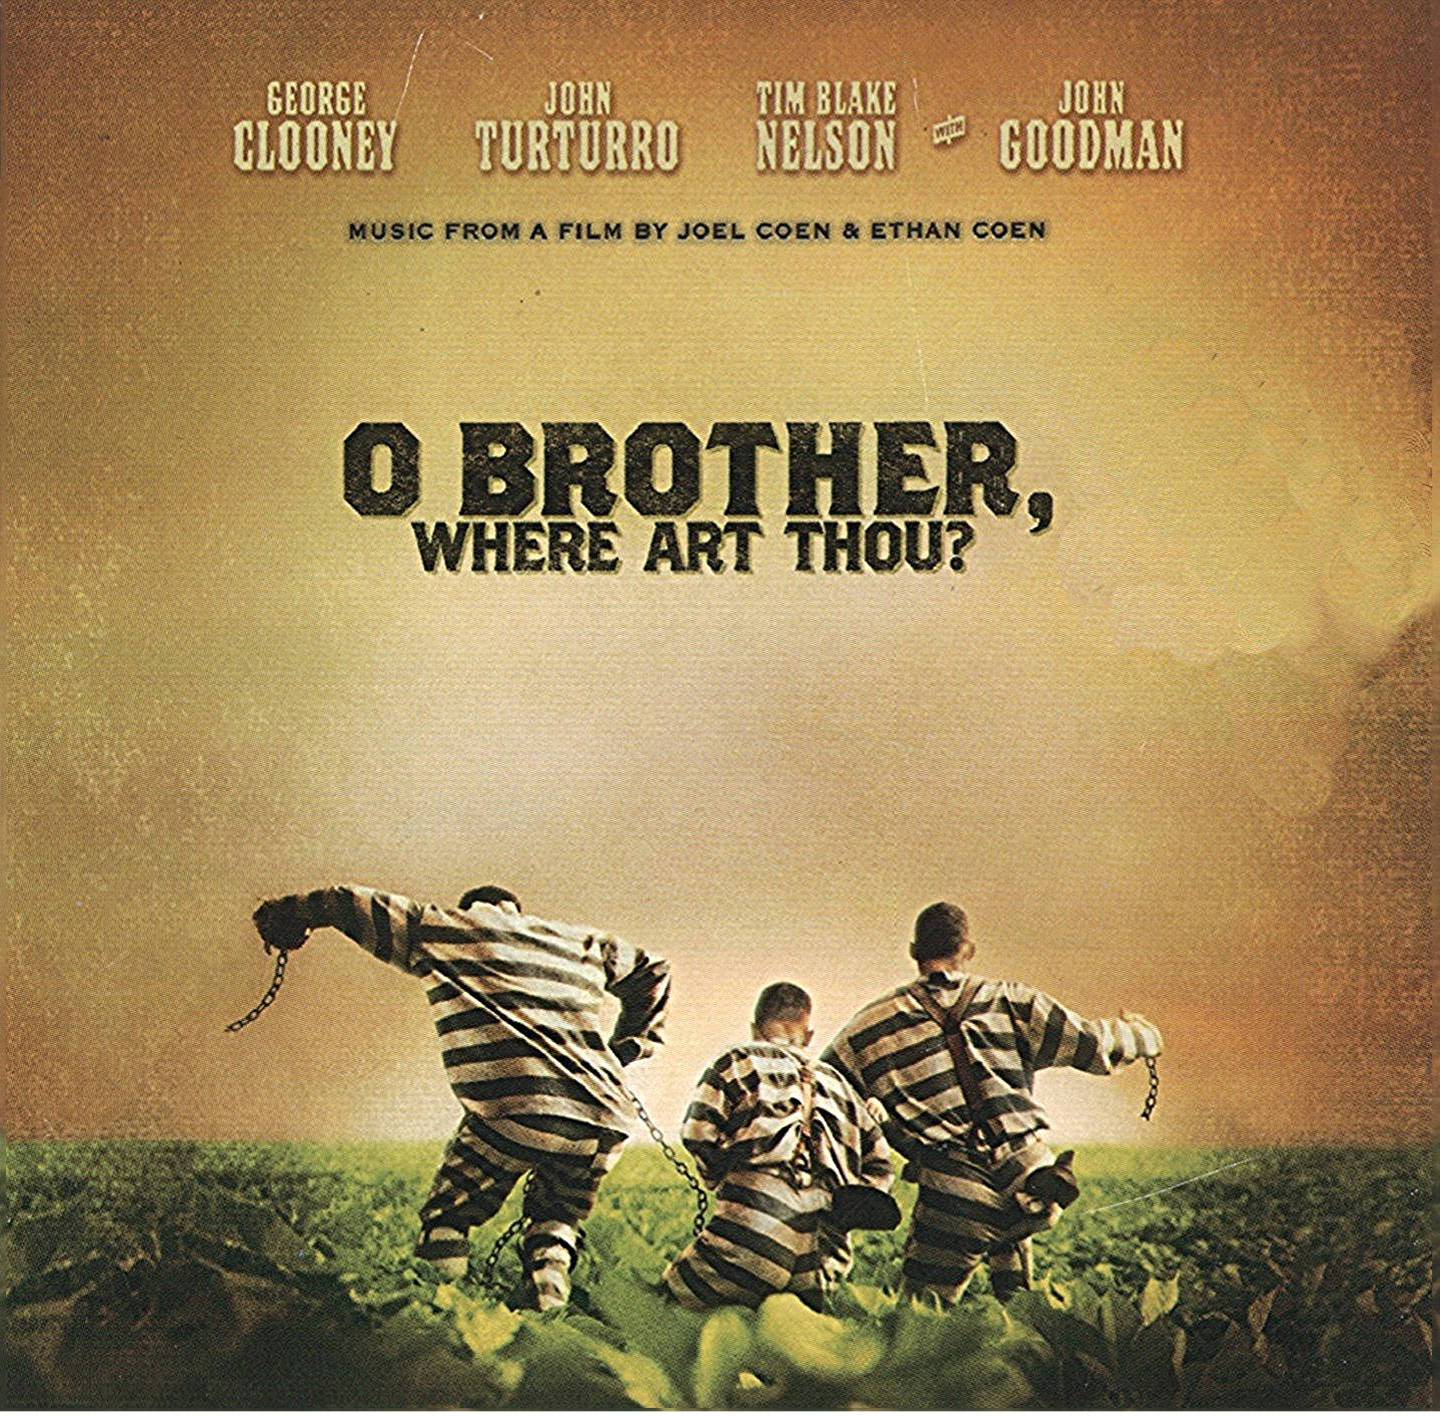 [O_Brother_Where_Art_Thou_-_Soundtrack_(Teil_1)_-_Front.jpg]